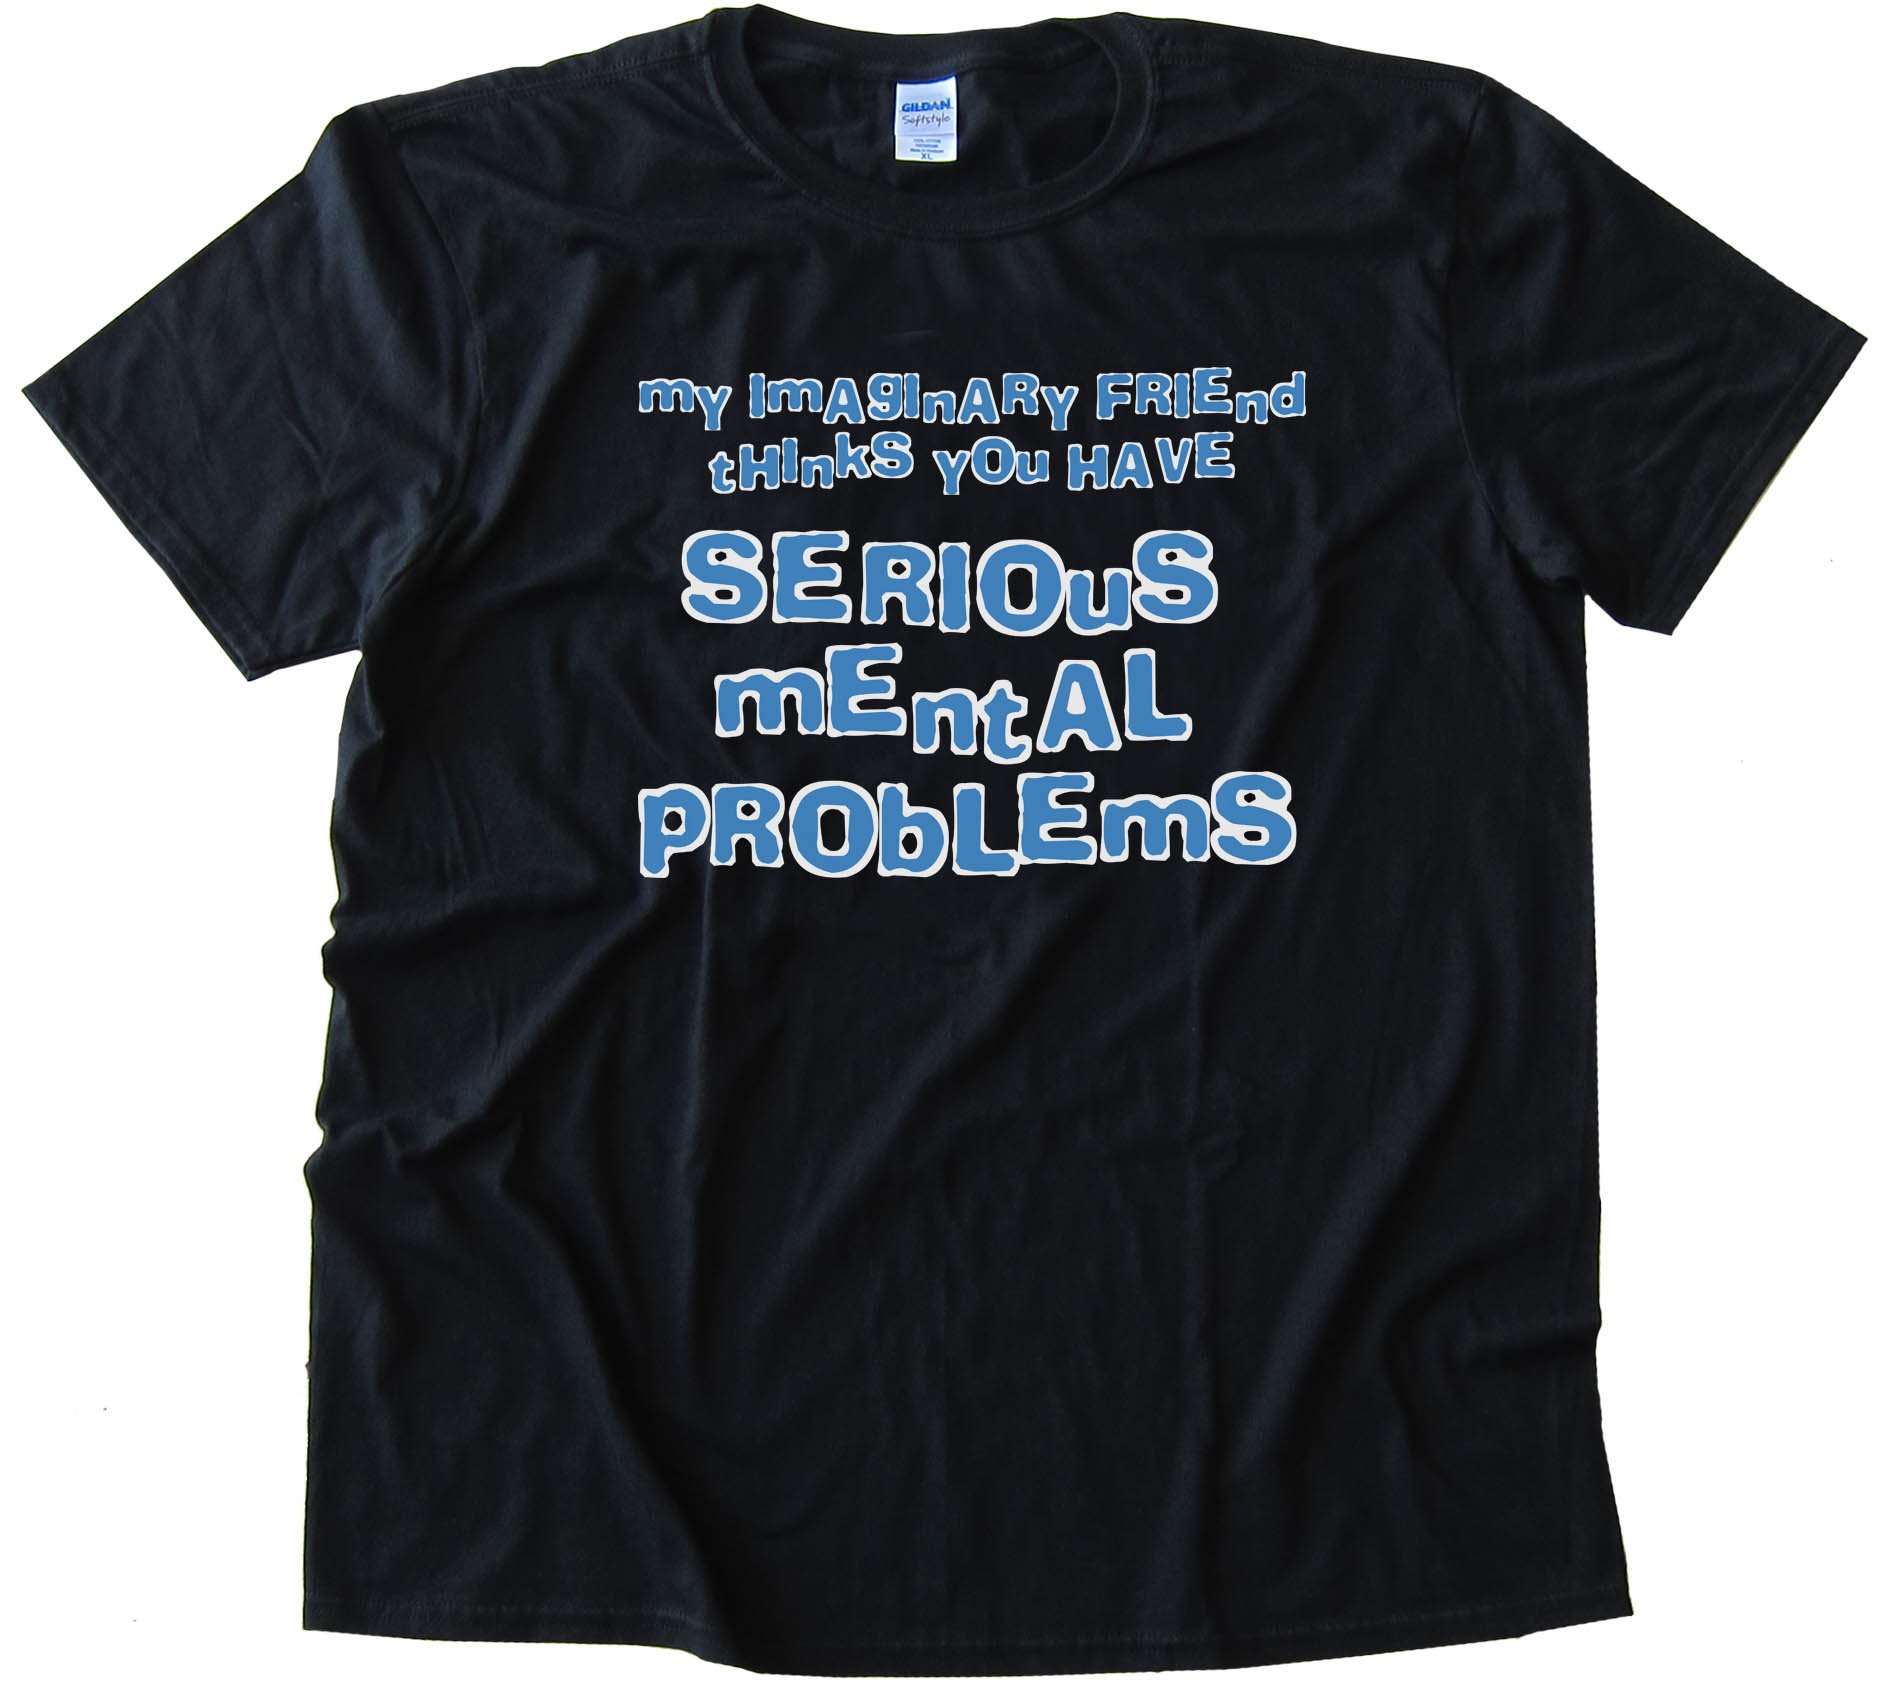 My Imaginary Friend Thinks You Have Serious Mental Problems - Tee Shirt